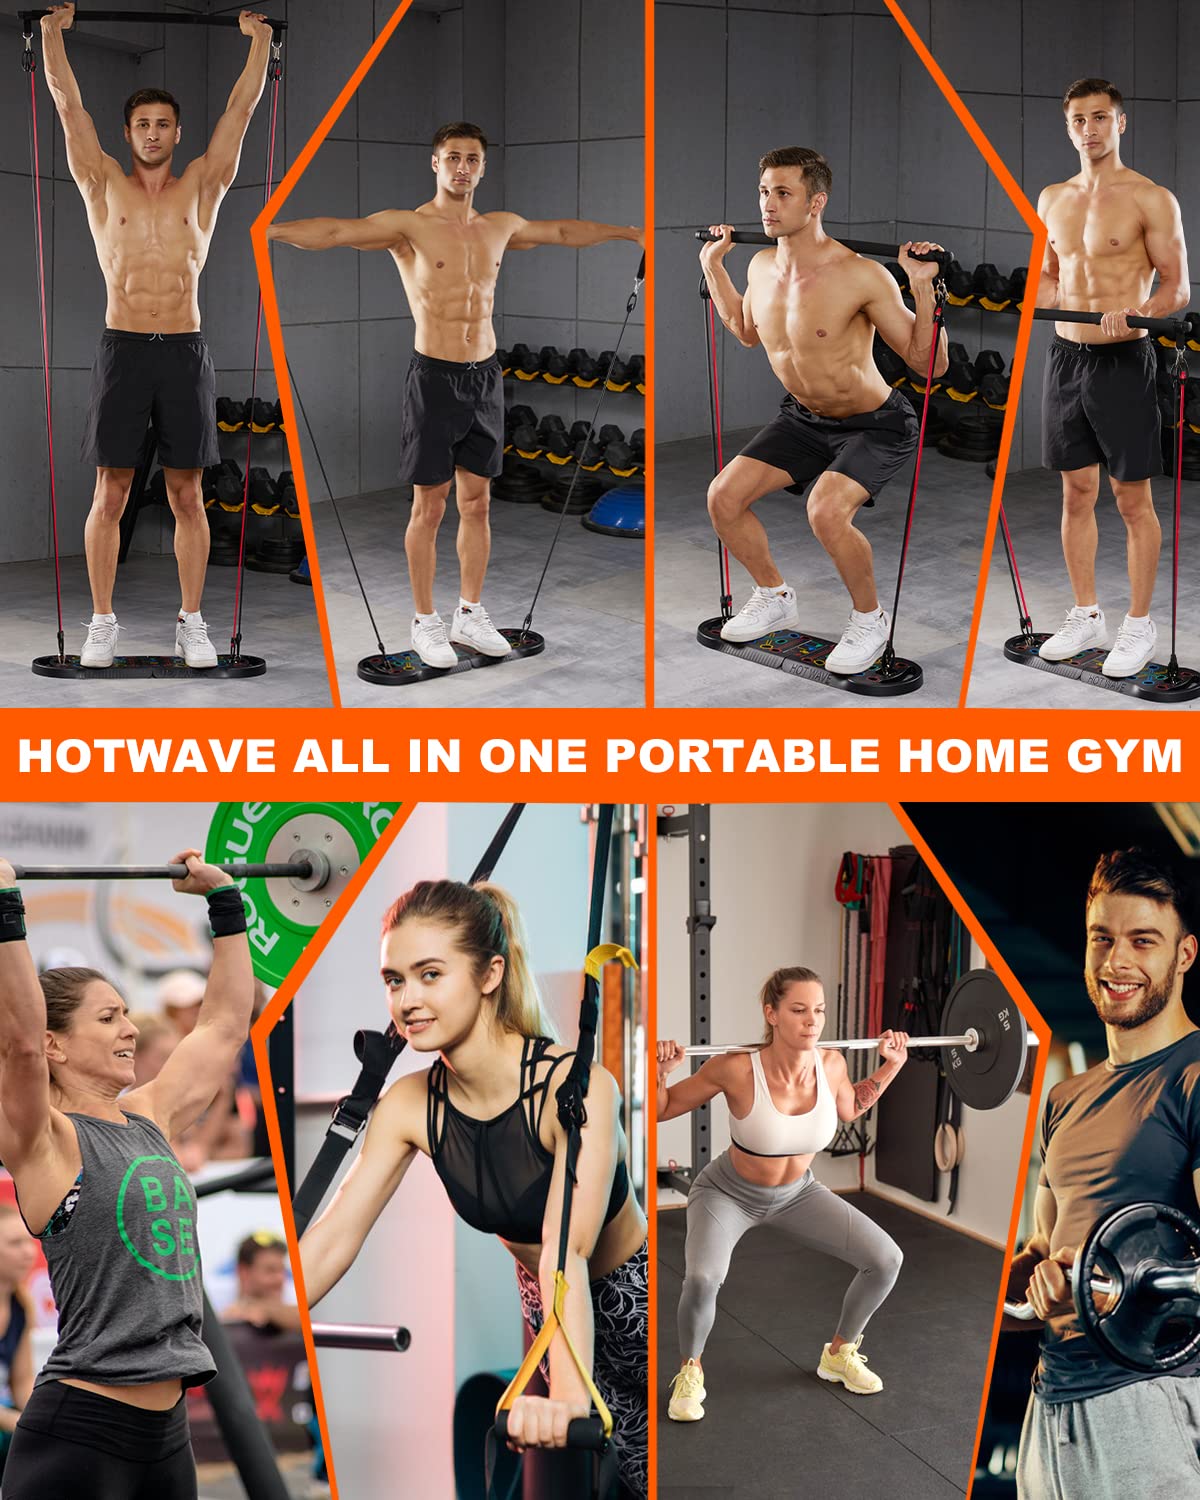 HOTWAVE Portable Workout Equipment with 15 Gym Accessories.18 in 1 Push Up Board Fitness ,Foldable Pushups Bar with Resistance Band. Strength Training for Man,Full Body Exercise at Home Gym